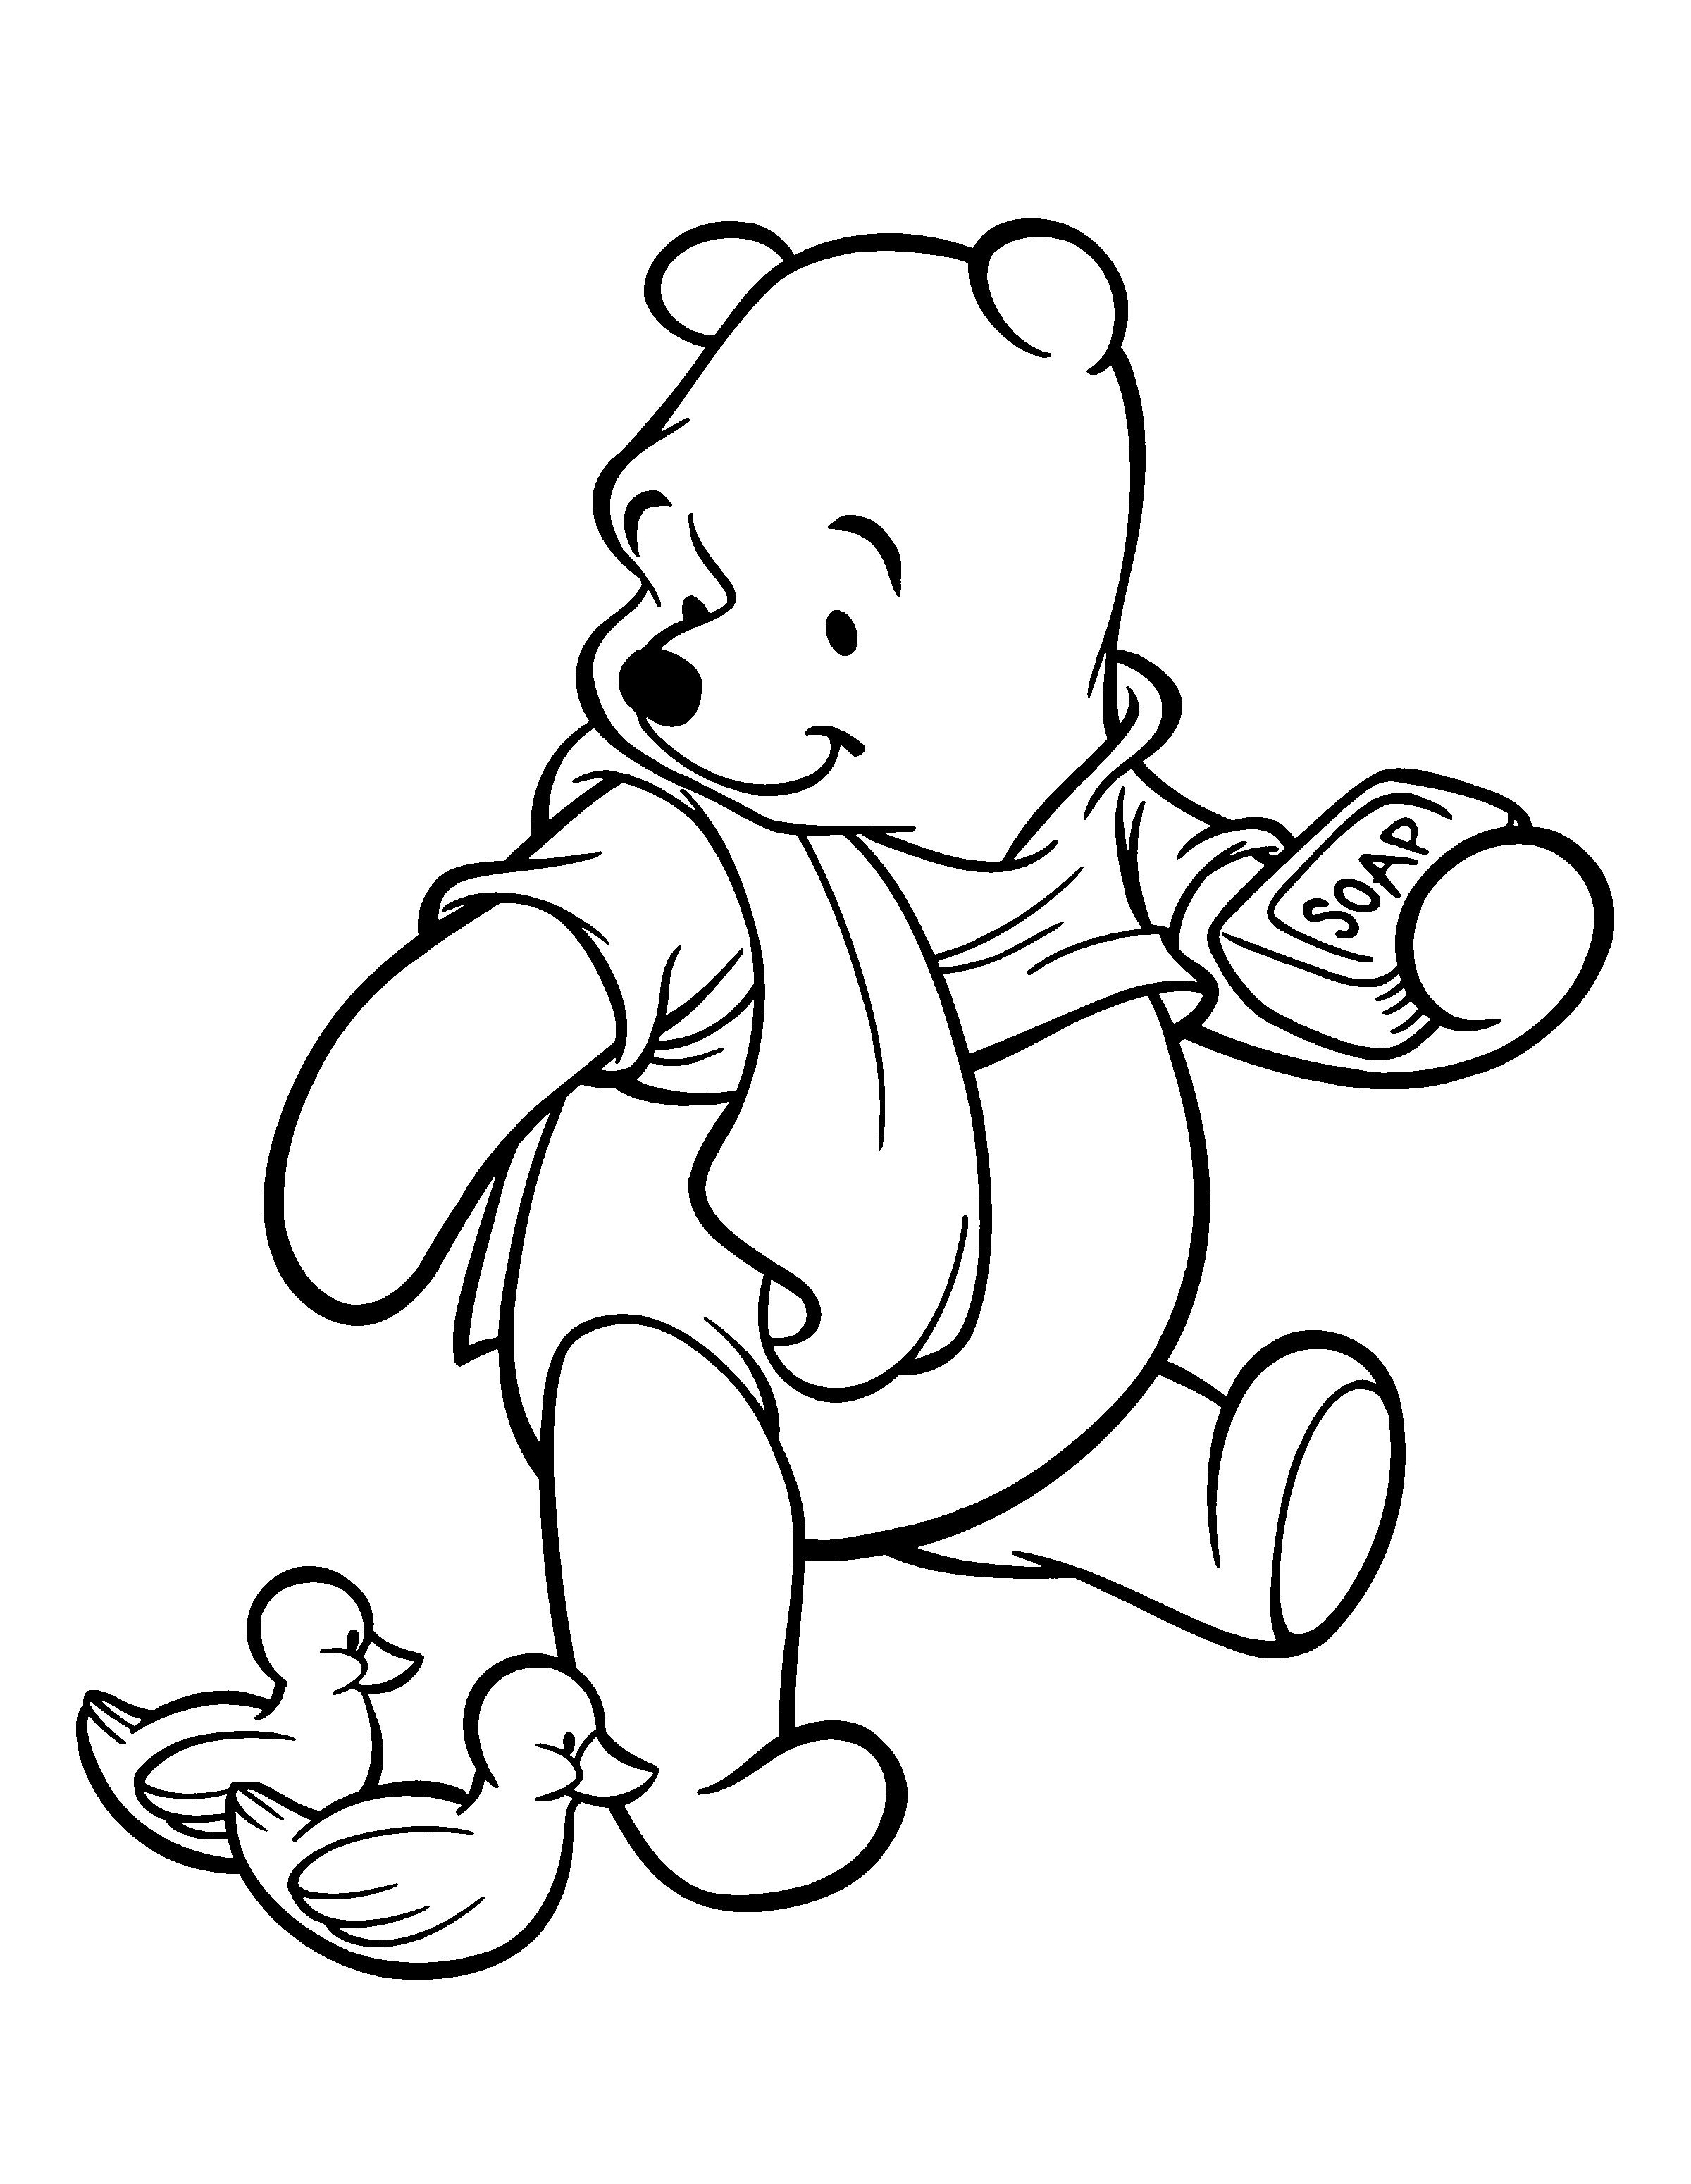 free winnie the pooh coloring pages free printable winnie the pooh coloring pages for kids pooh coloring free winnie pages the 